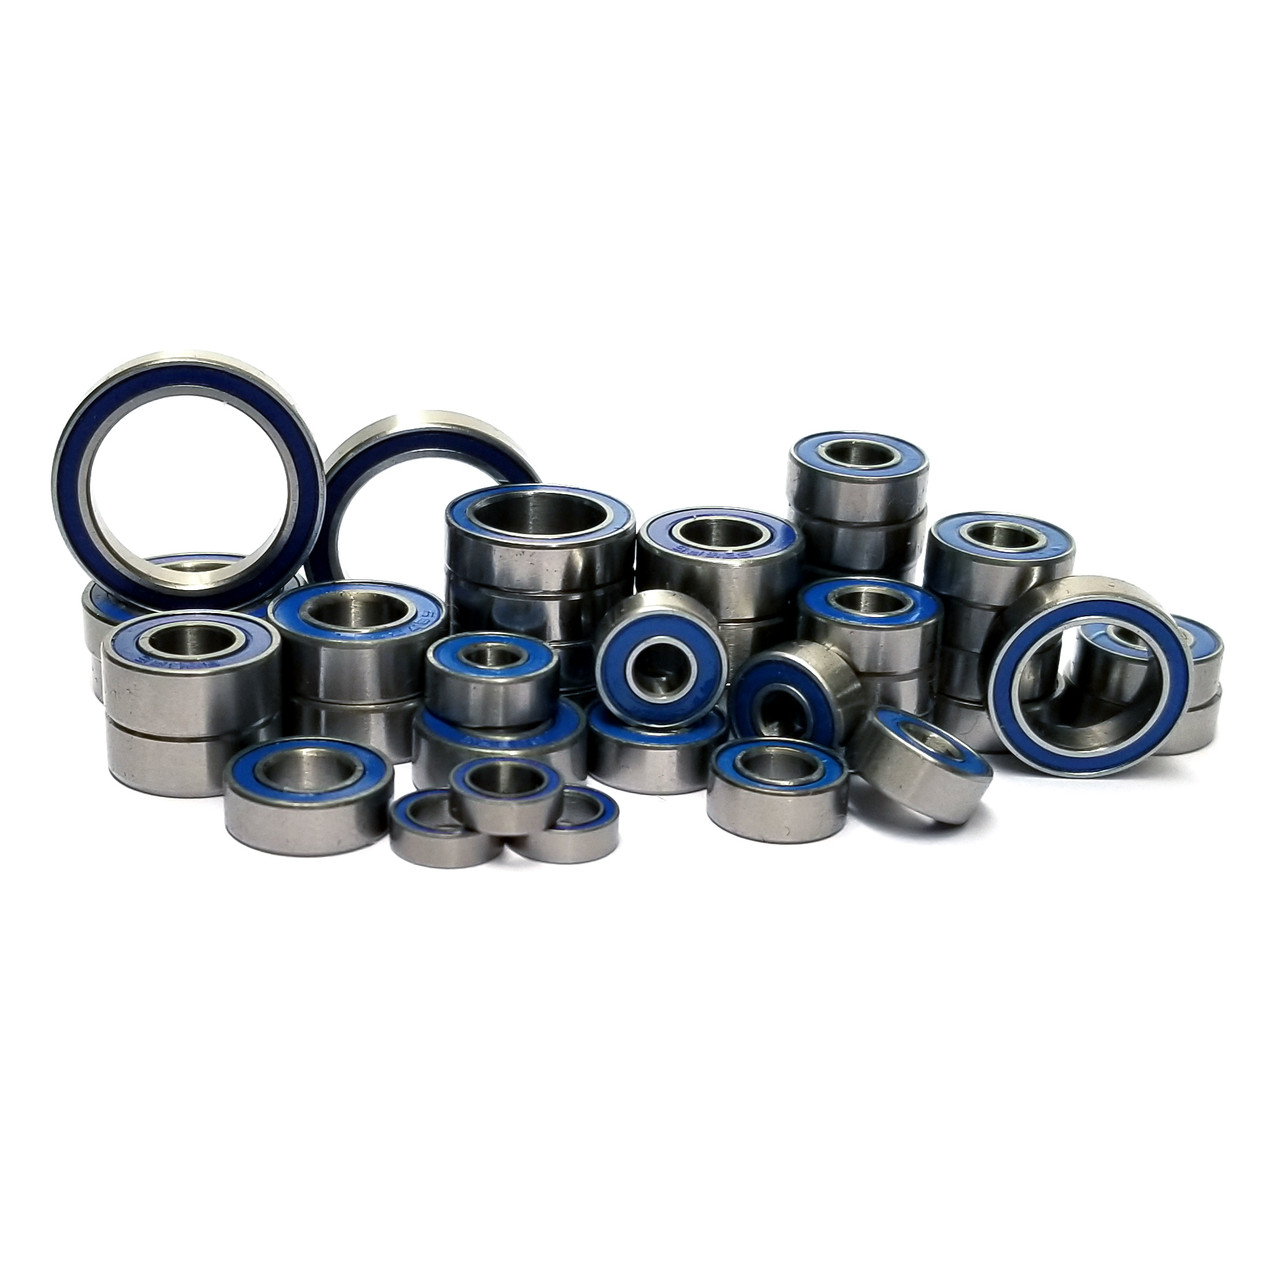 TRAXXAS TRX-4 complete rubber sealed bearing kit.  Comes with a full 41 pieces and replaces all bearings on your truck.